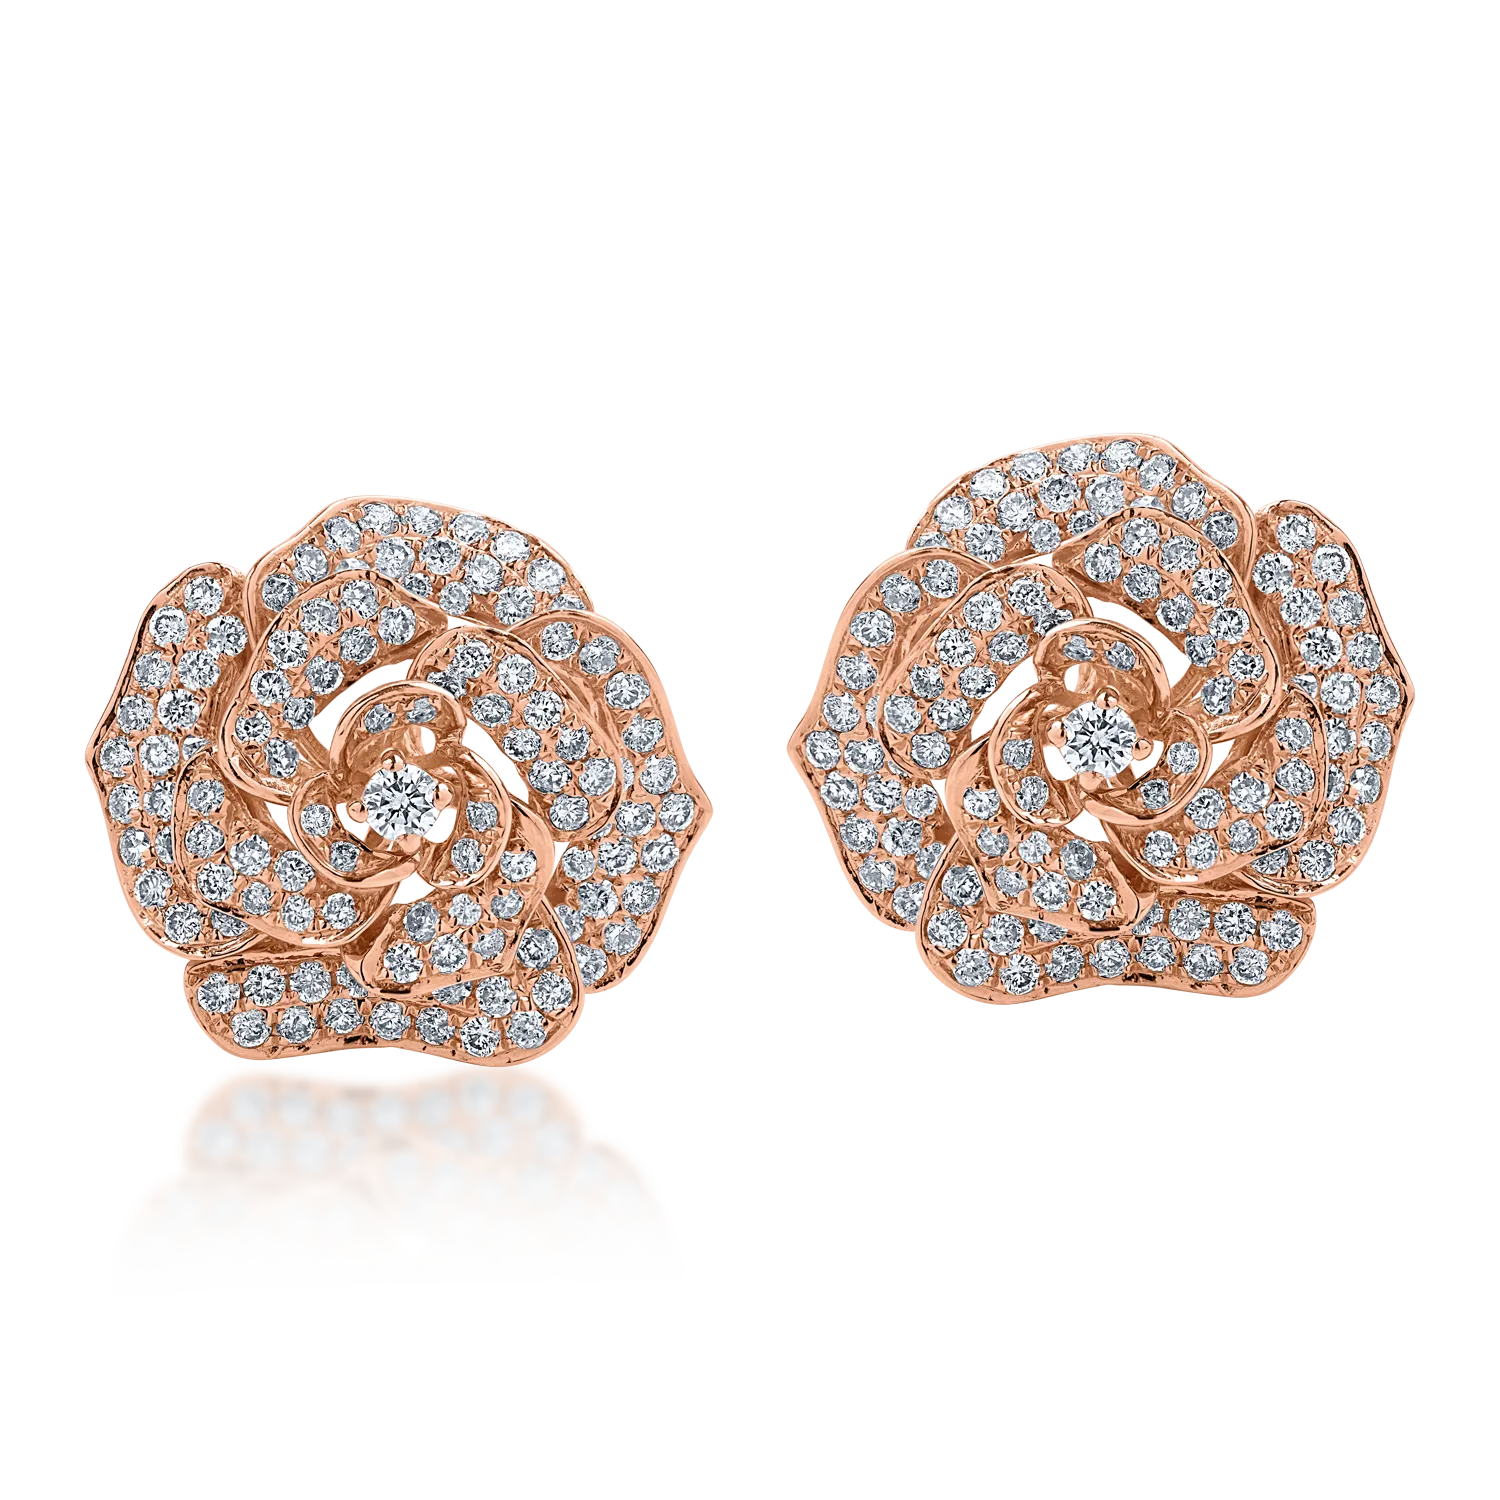 Rose gold earrings with 2ct diamonds